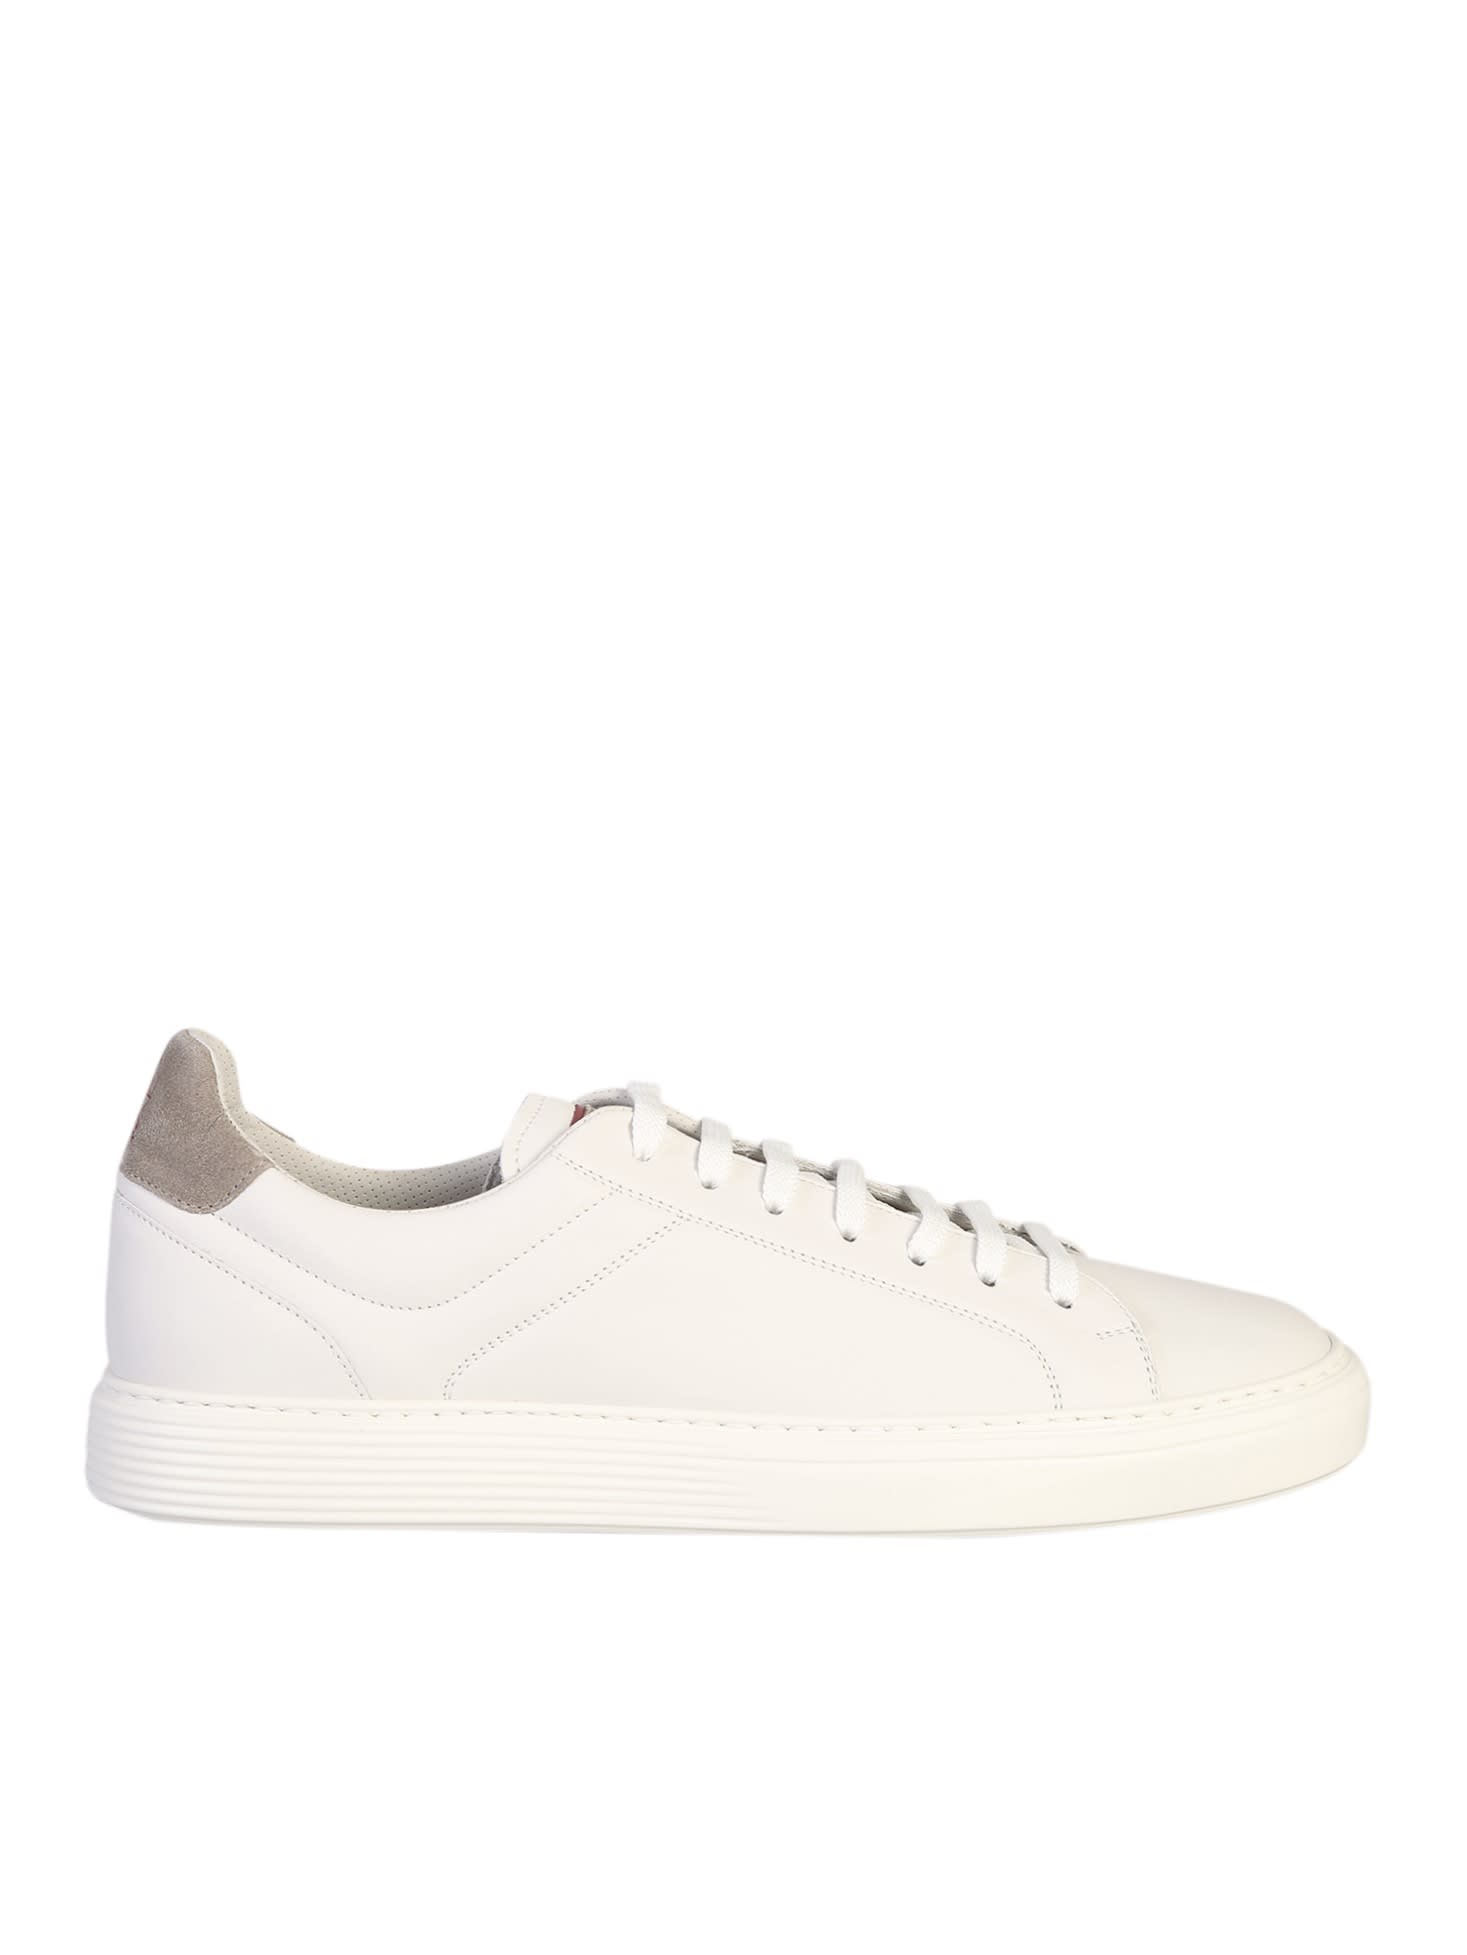 BRUNELLO CUCINELLI LACE UP SNEAKERS,11728987